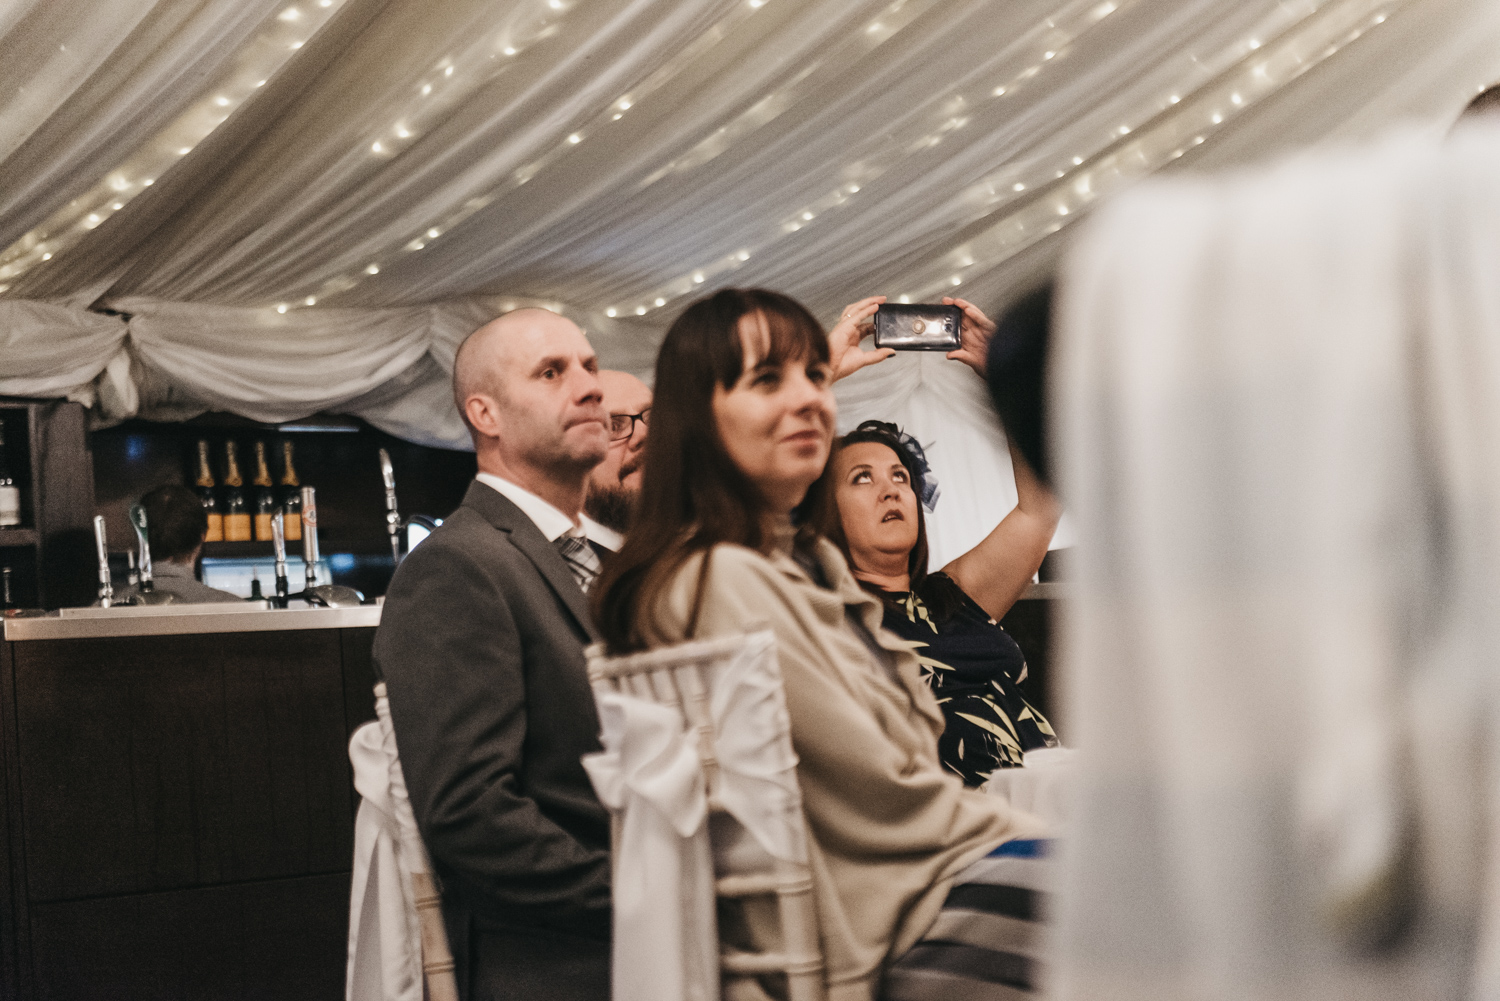 Guests taking photos